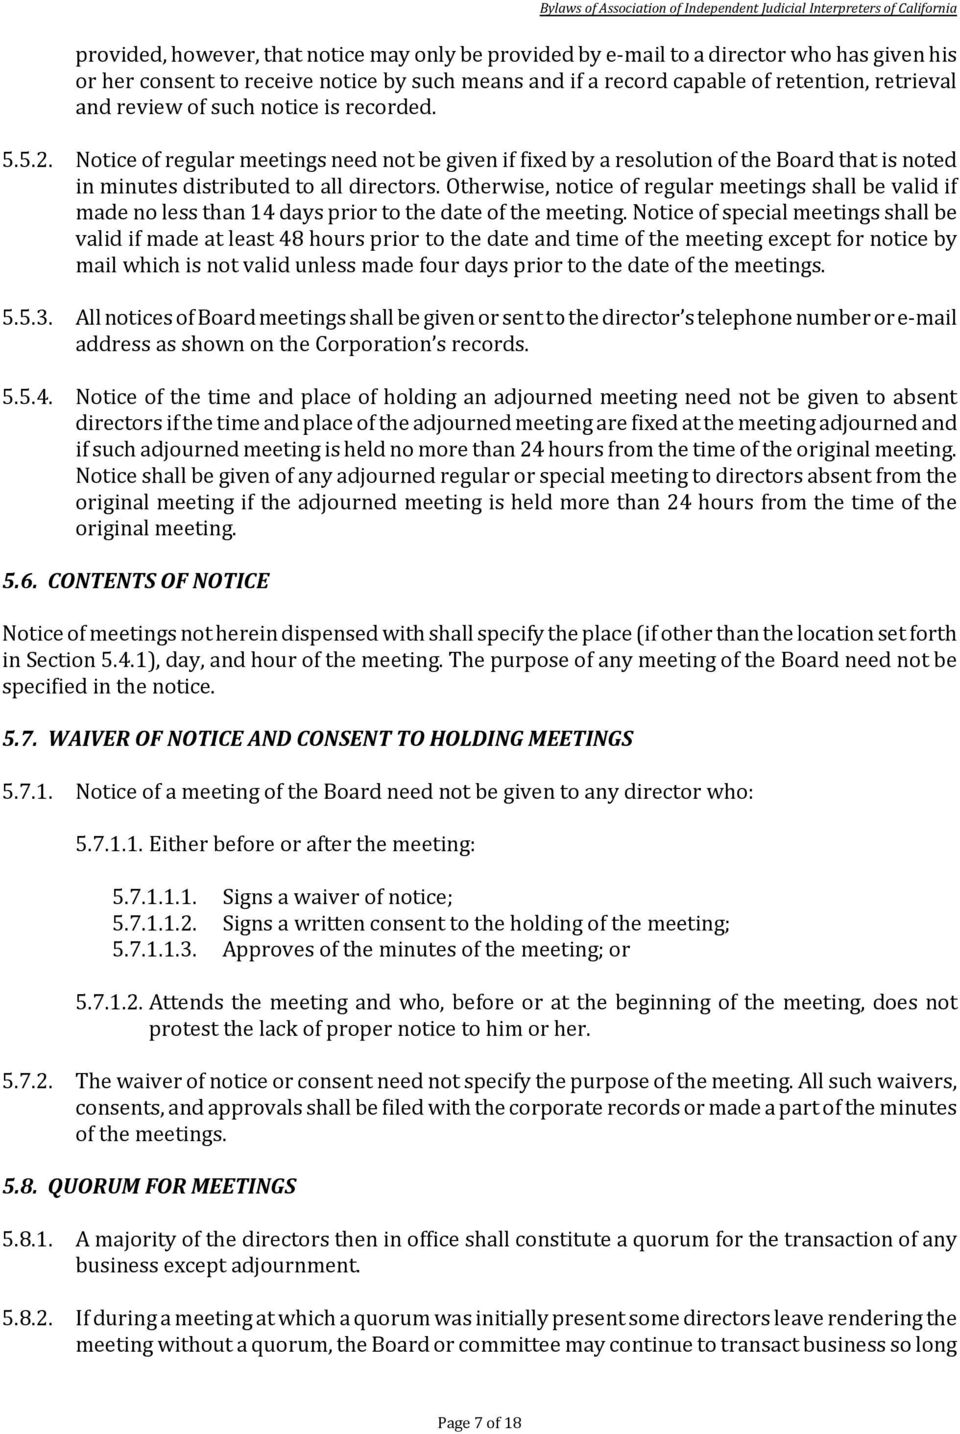 Otherwise, notice of regular meetings shall be valid if made no less than 14 days prior to the date of the meeting.